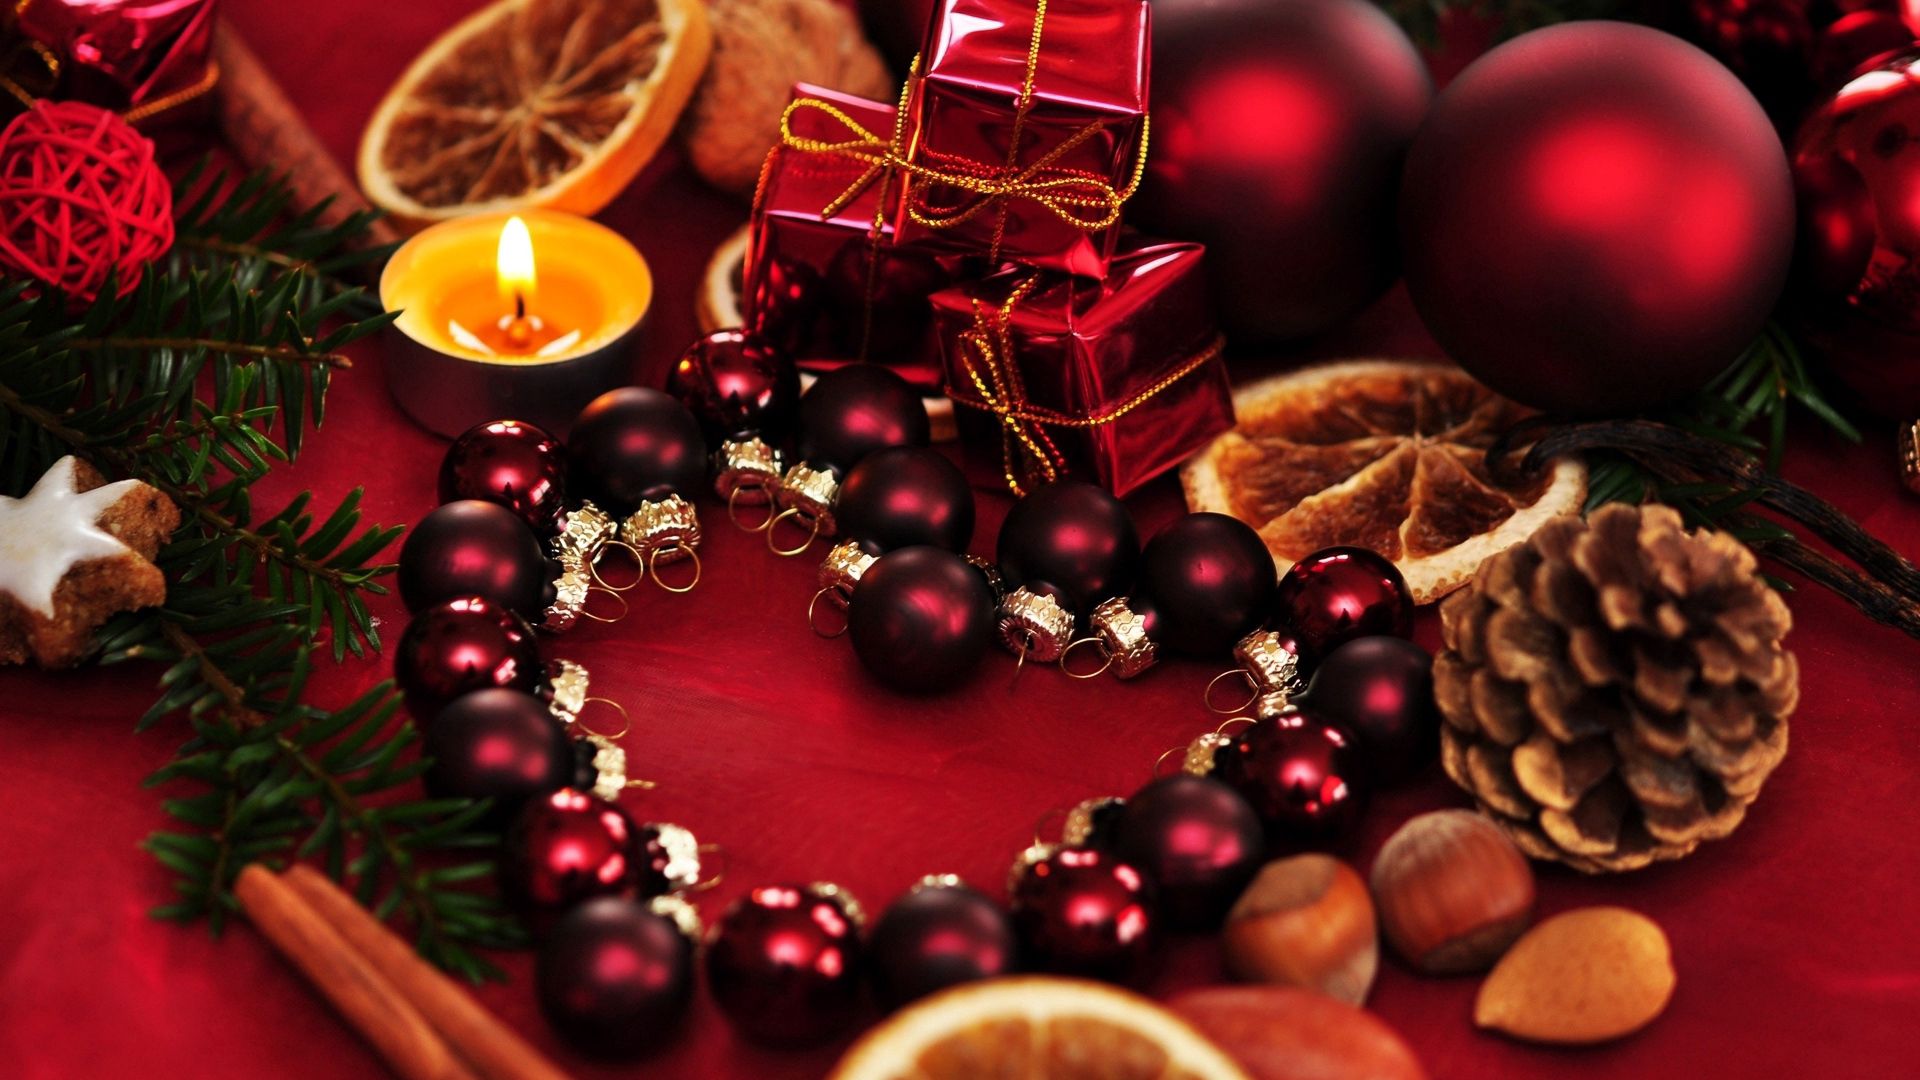 1920x1080 Background holidays, candles, christmas, holiday, balls, presents, gifts